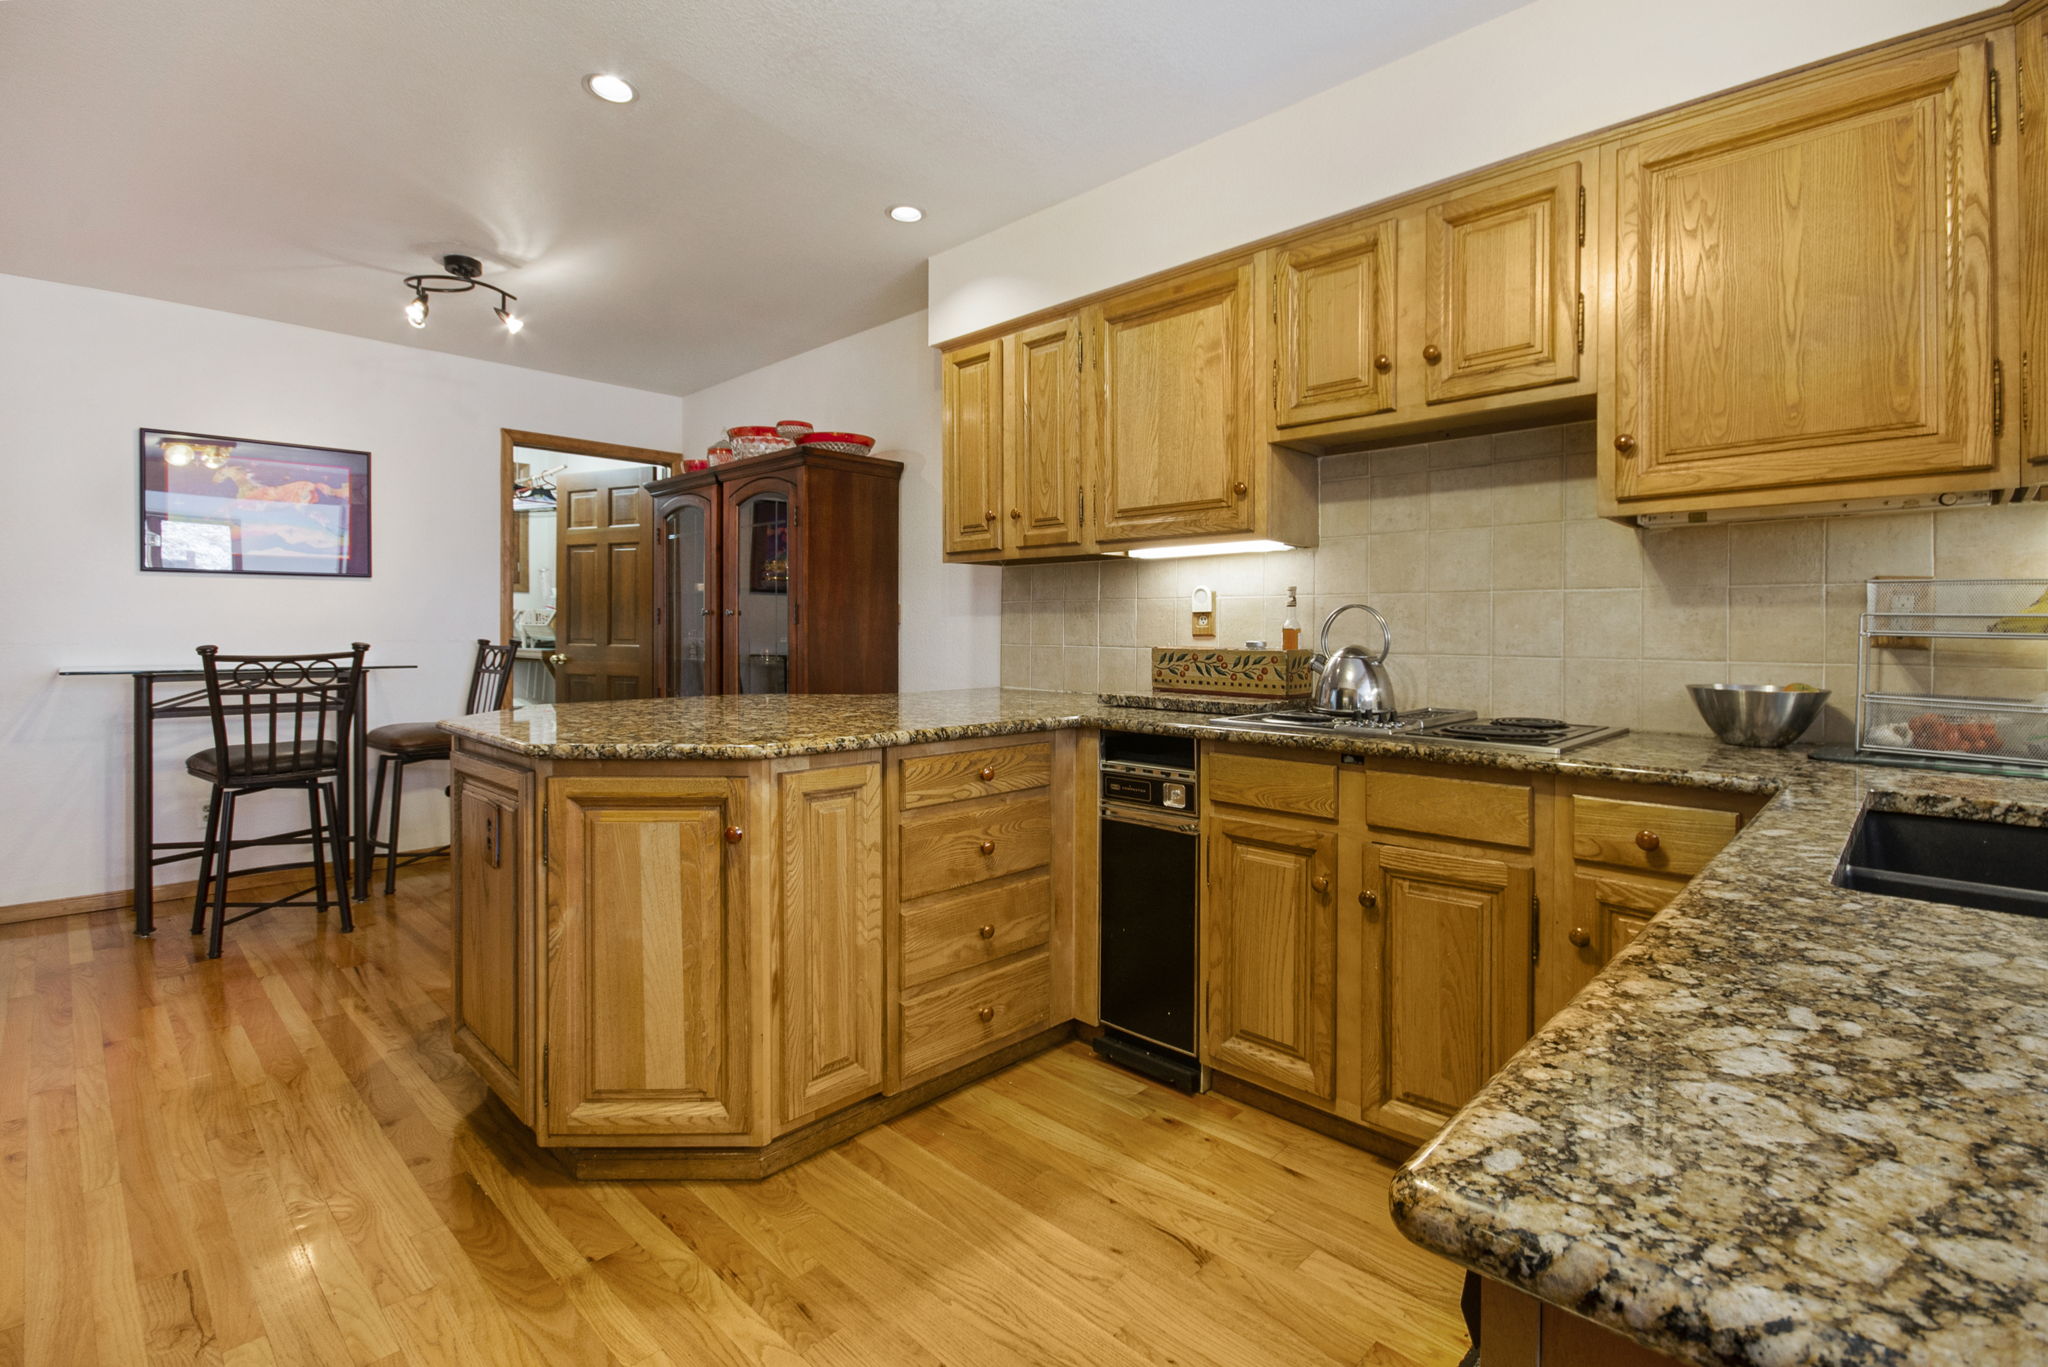  14556 W 3rd Ave, Golden, CO 80401, US Photo 21